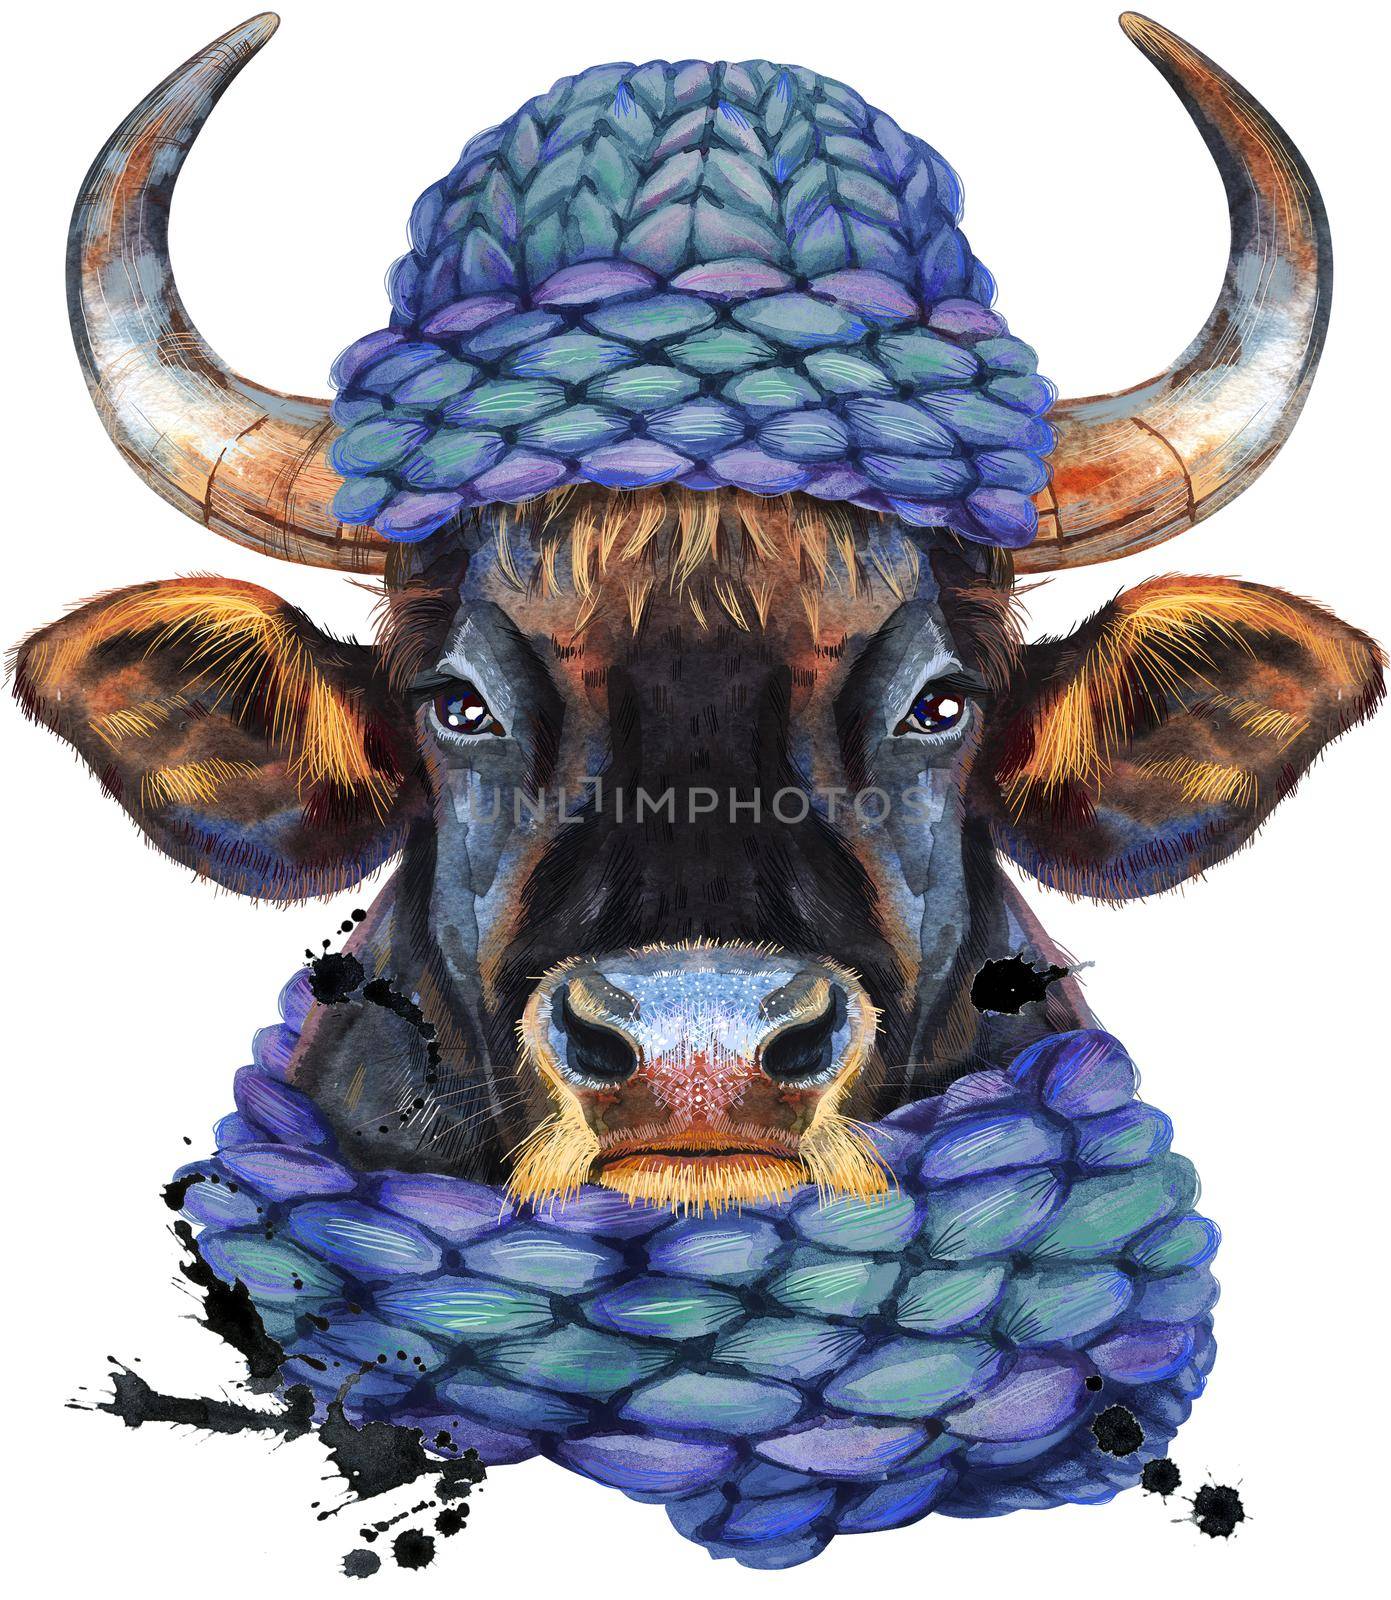 Bull in knitted blue hat. Watercolor graphics. Bull animal illustration with splashes.